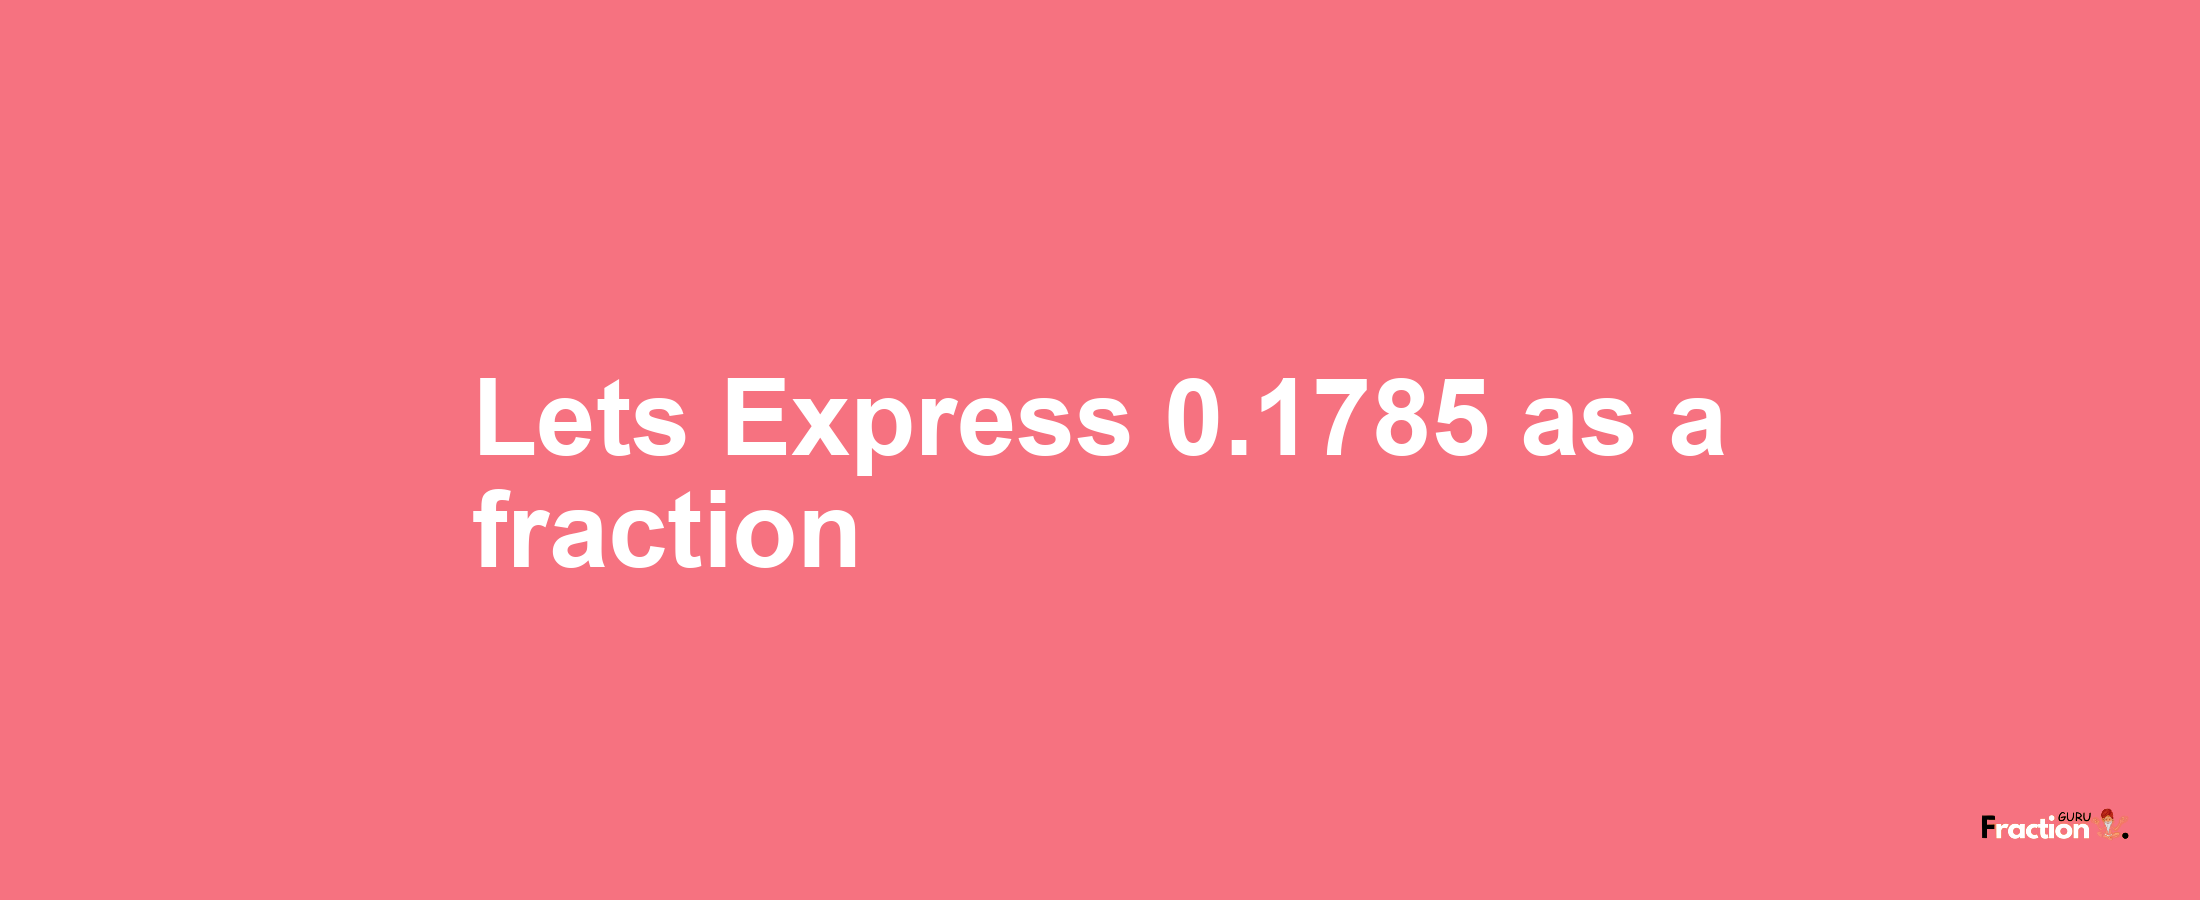 Lets Express 0.1785 as afraction